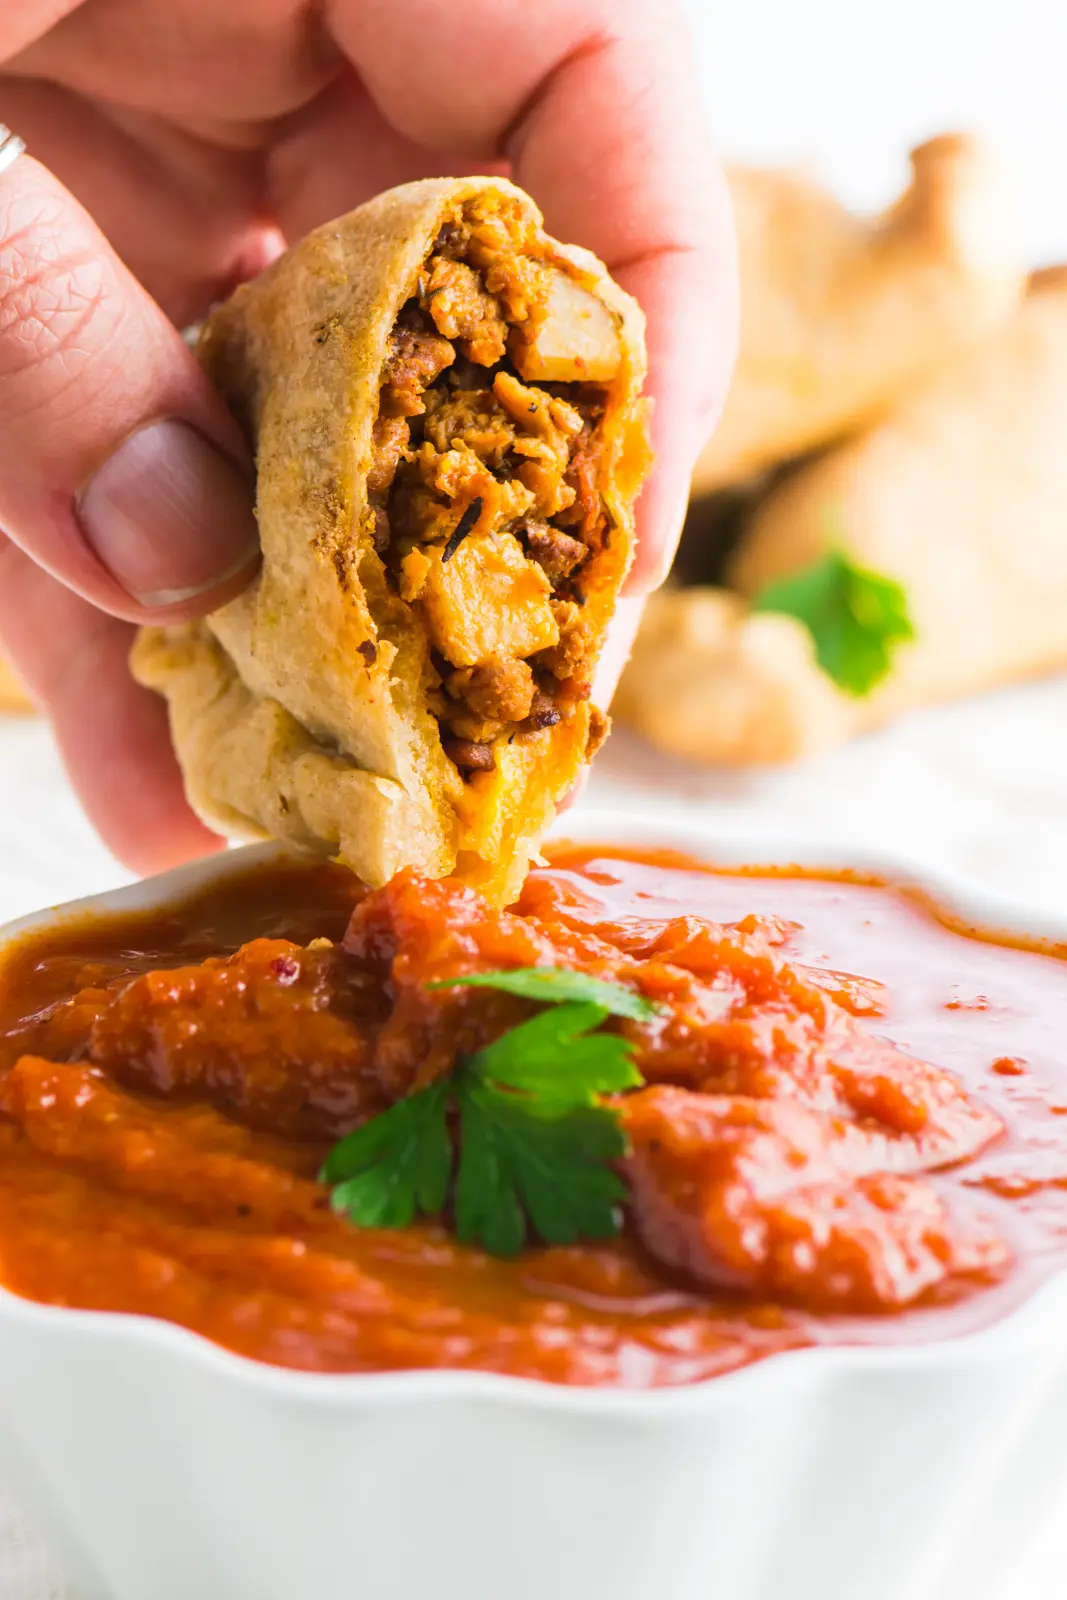 A hand holds a vegan empanada, dipping it into a red sauce.